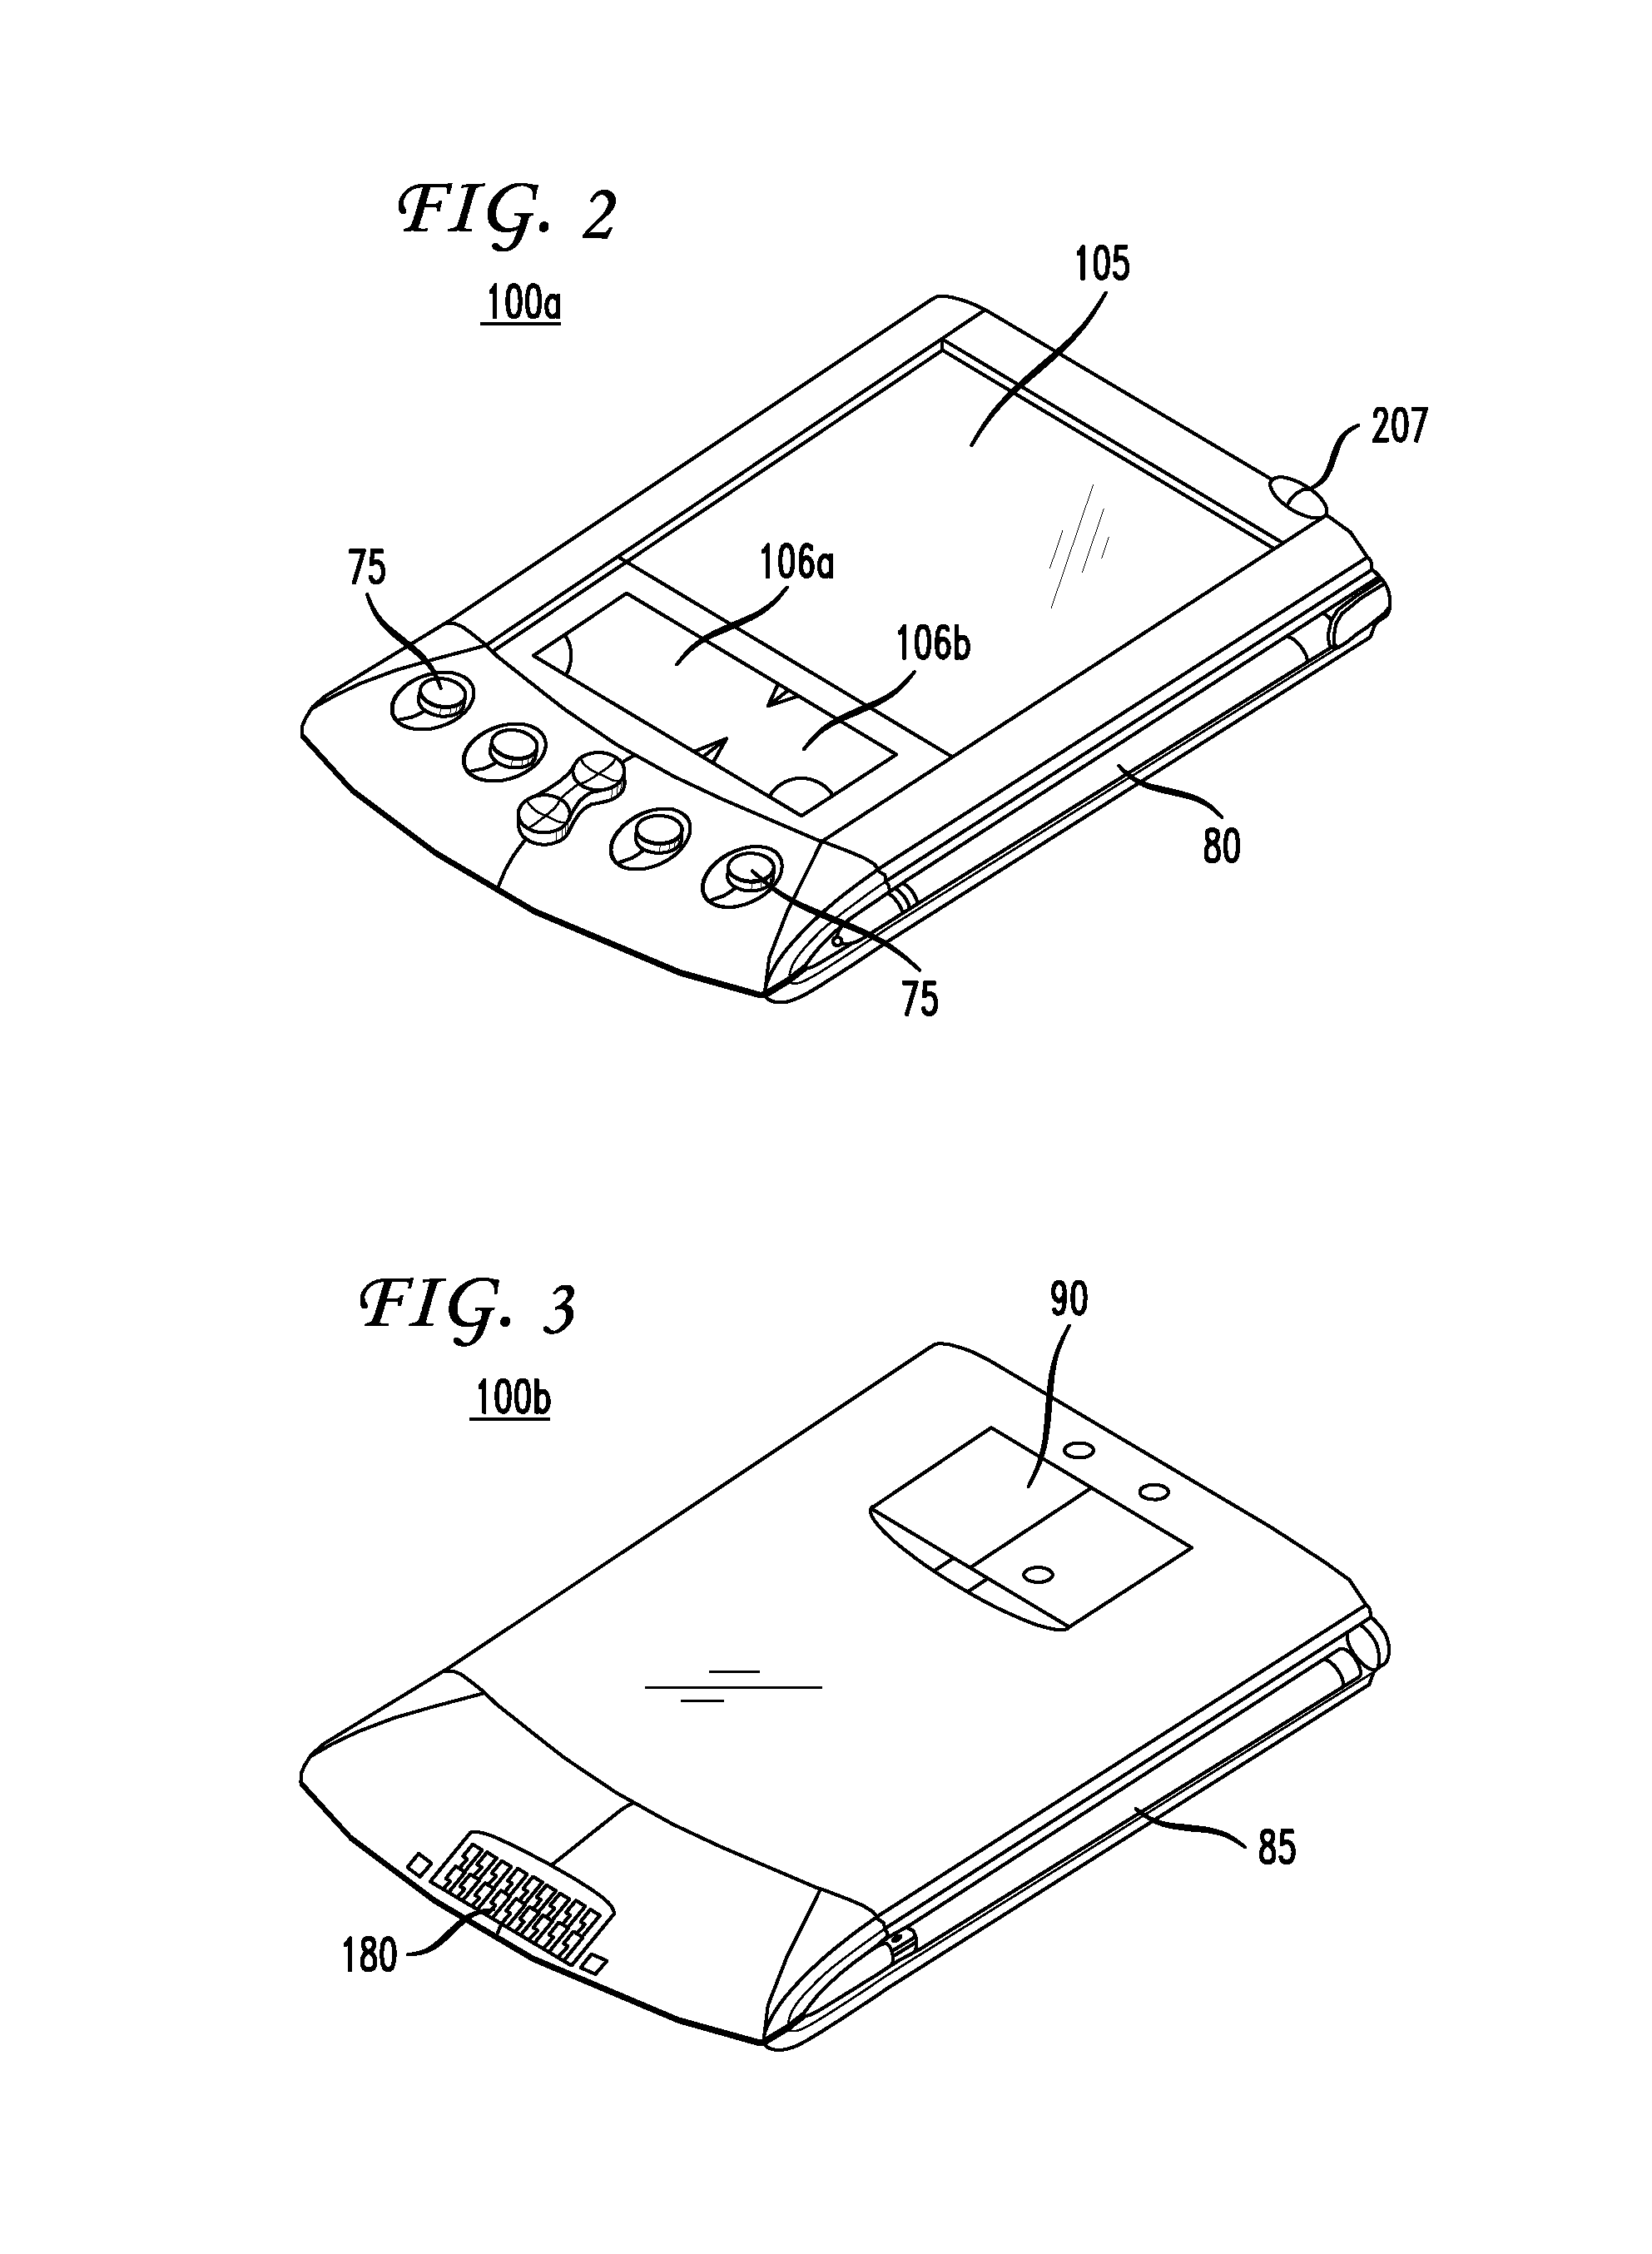 Security method and apparatus for controlling the data exchange on handheld computers